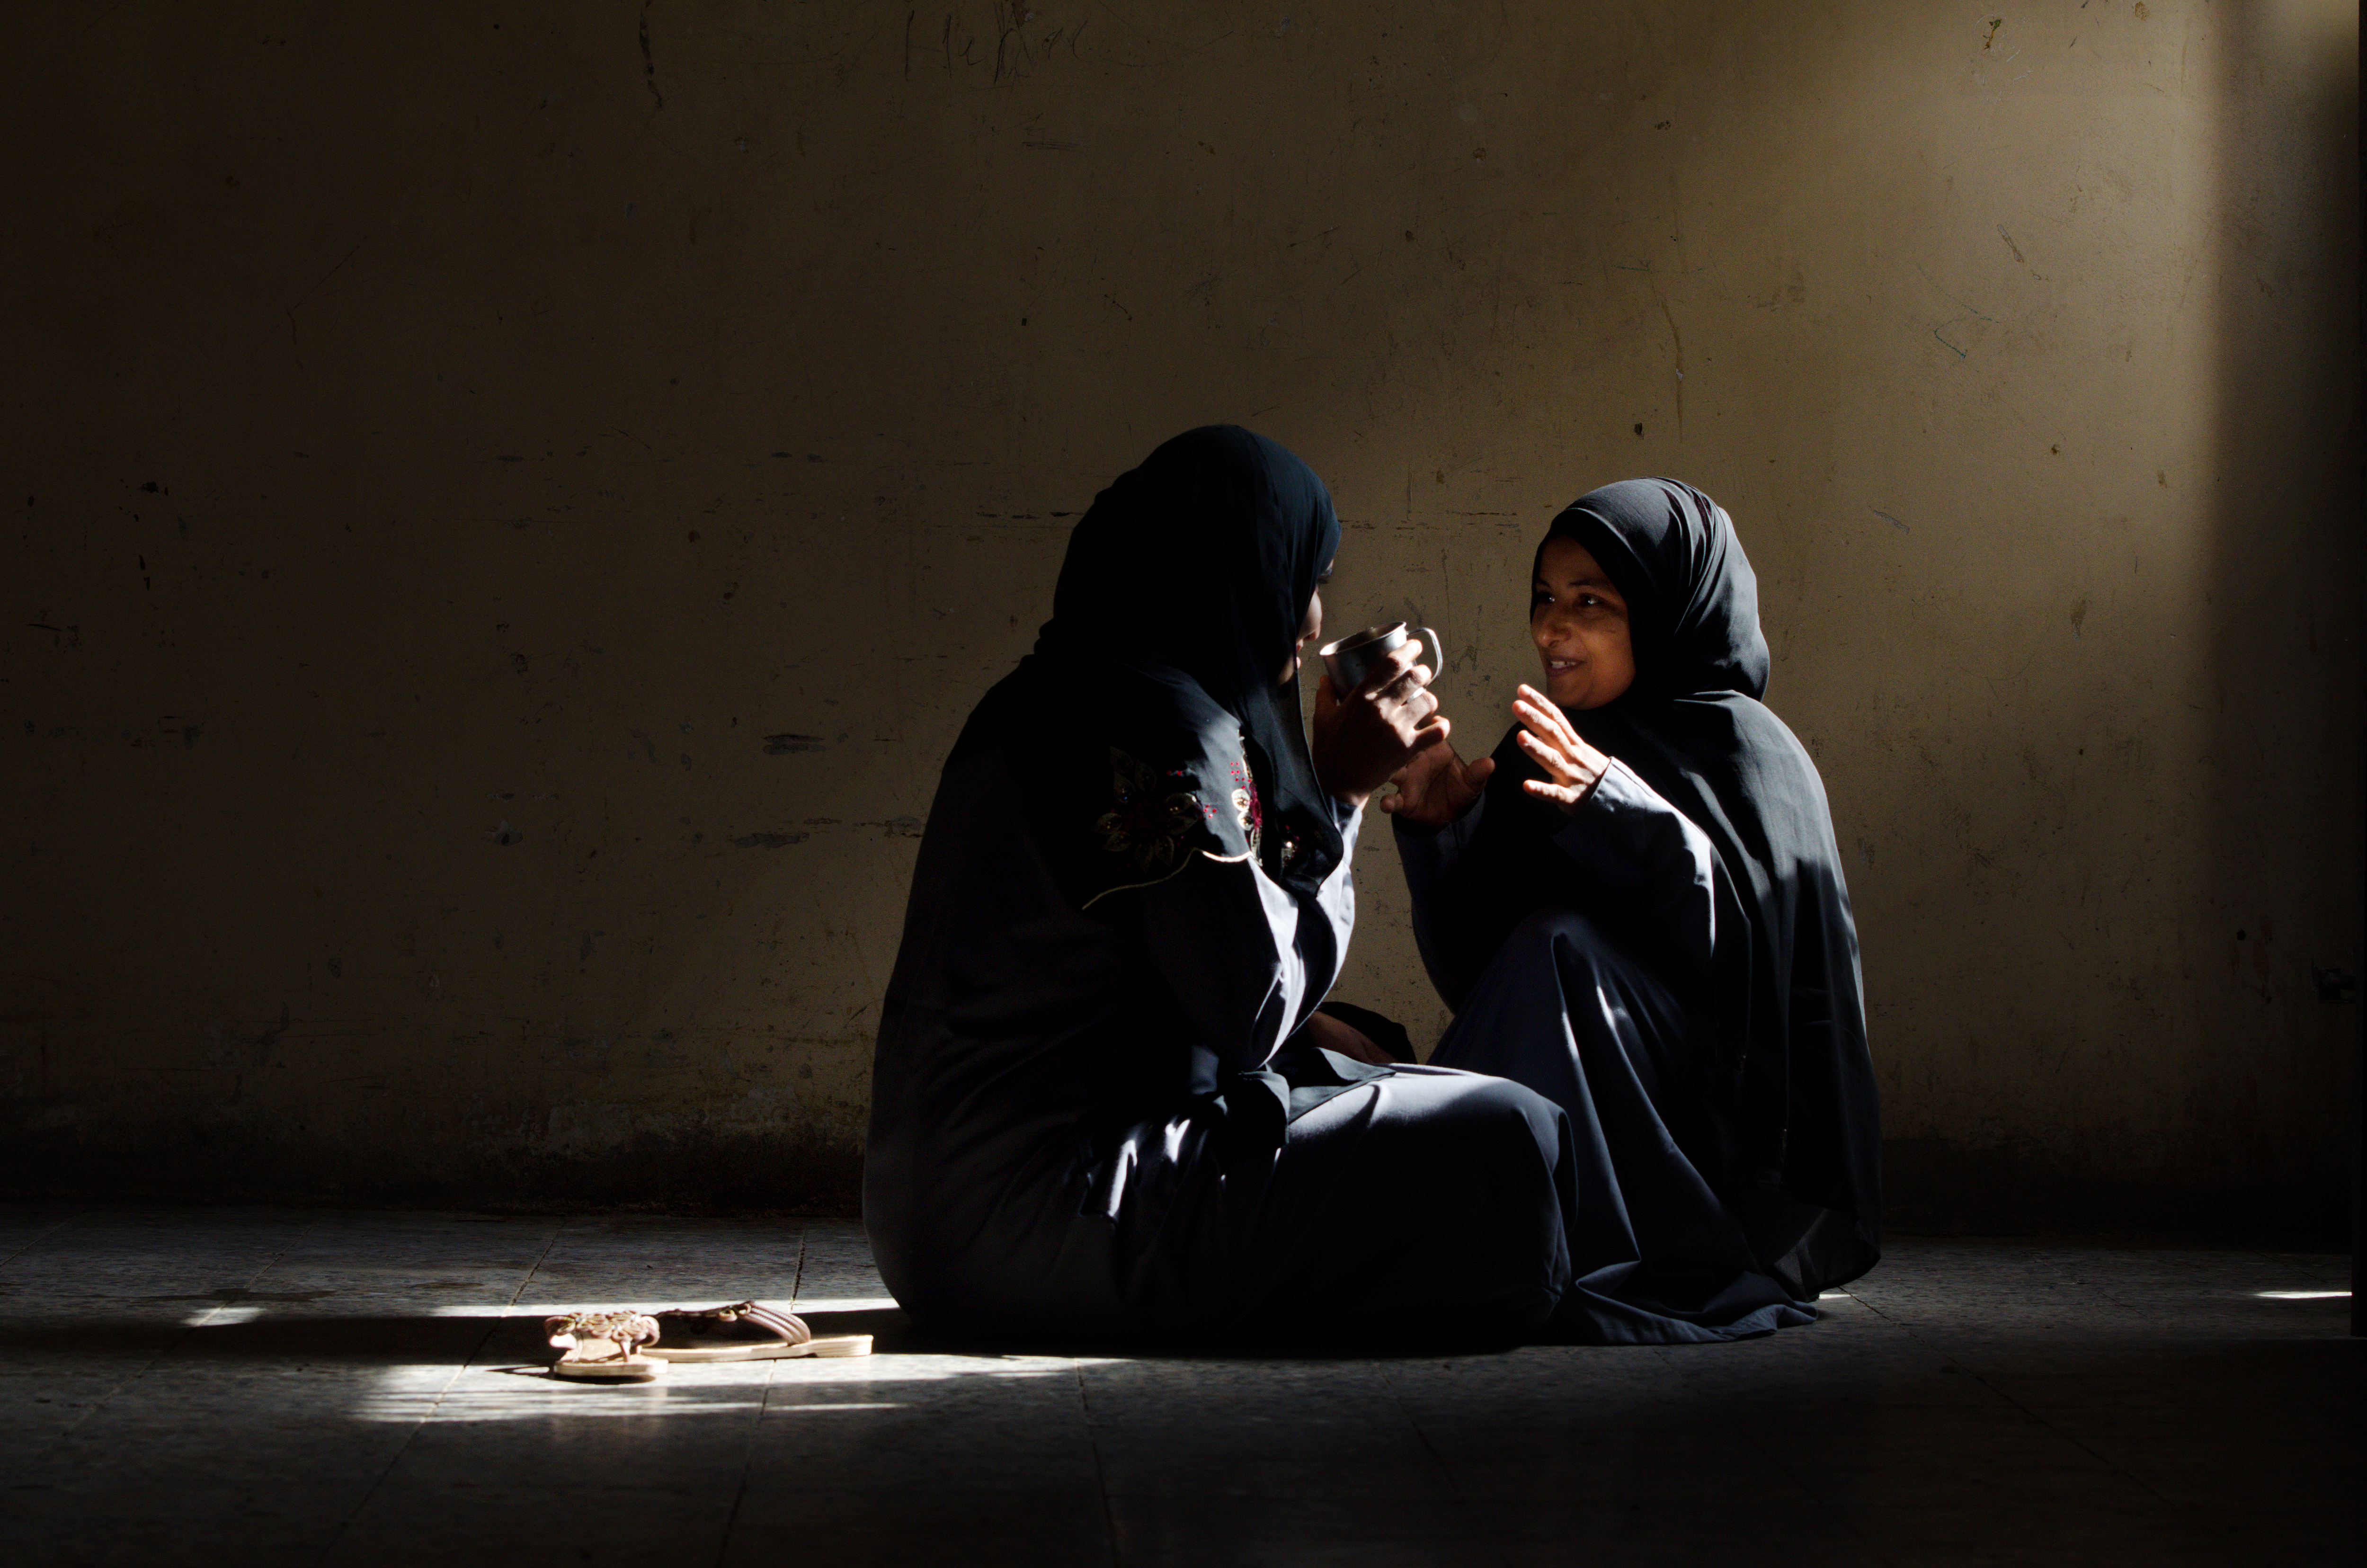 Young women in Hodeidah prison: Mariam, 19 years old, (right), talking to her friend Hafsah, age 27. Photo credit: © Amira Al-Sharif/Progressio 